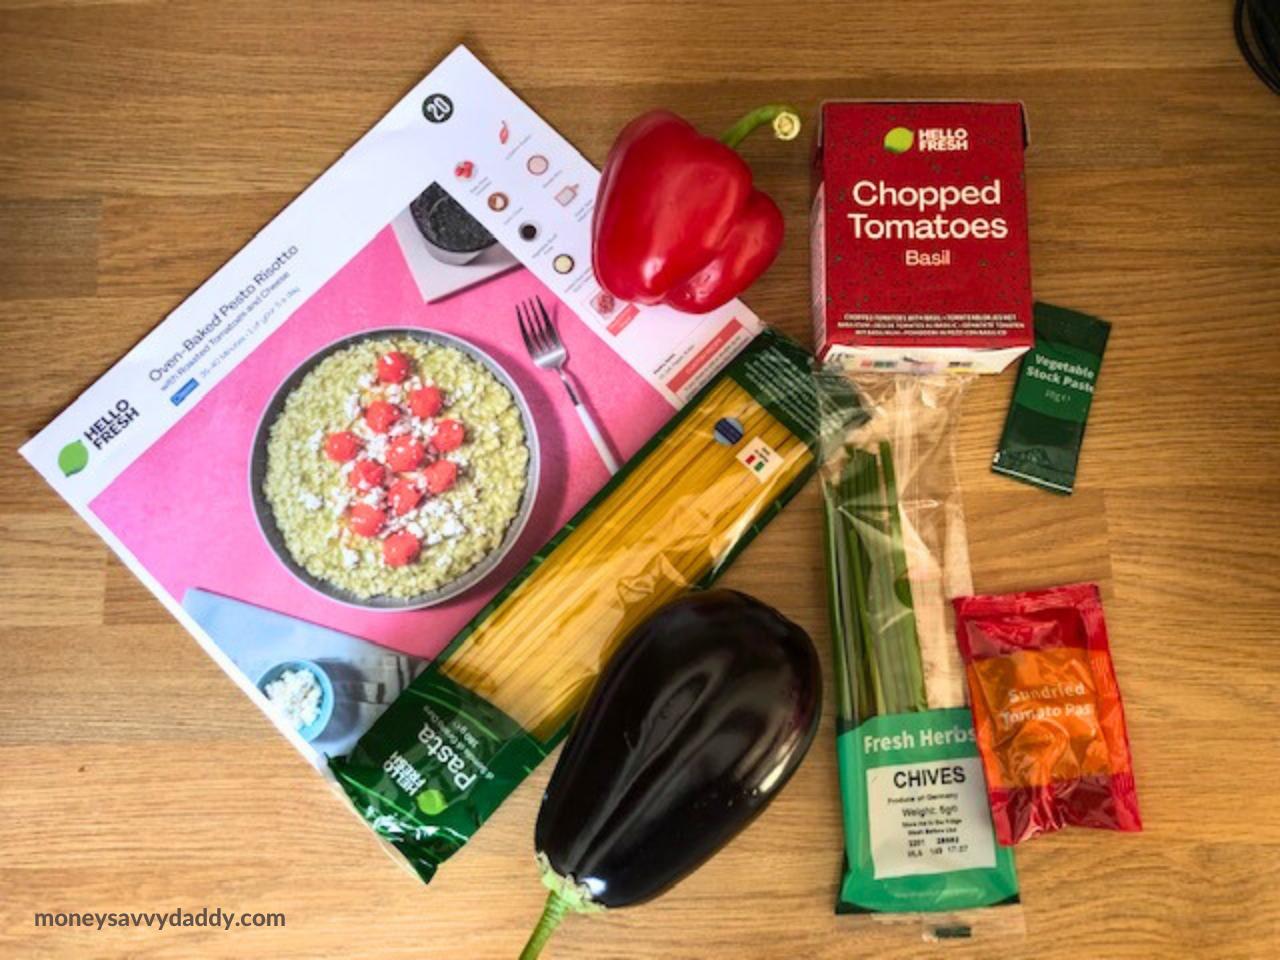 Recipe card and ingredients for HelloFresh Risotto